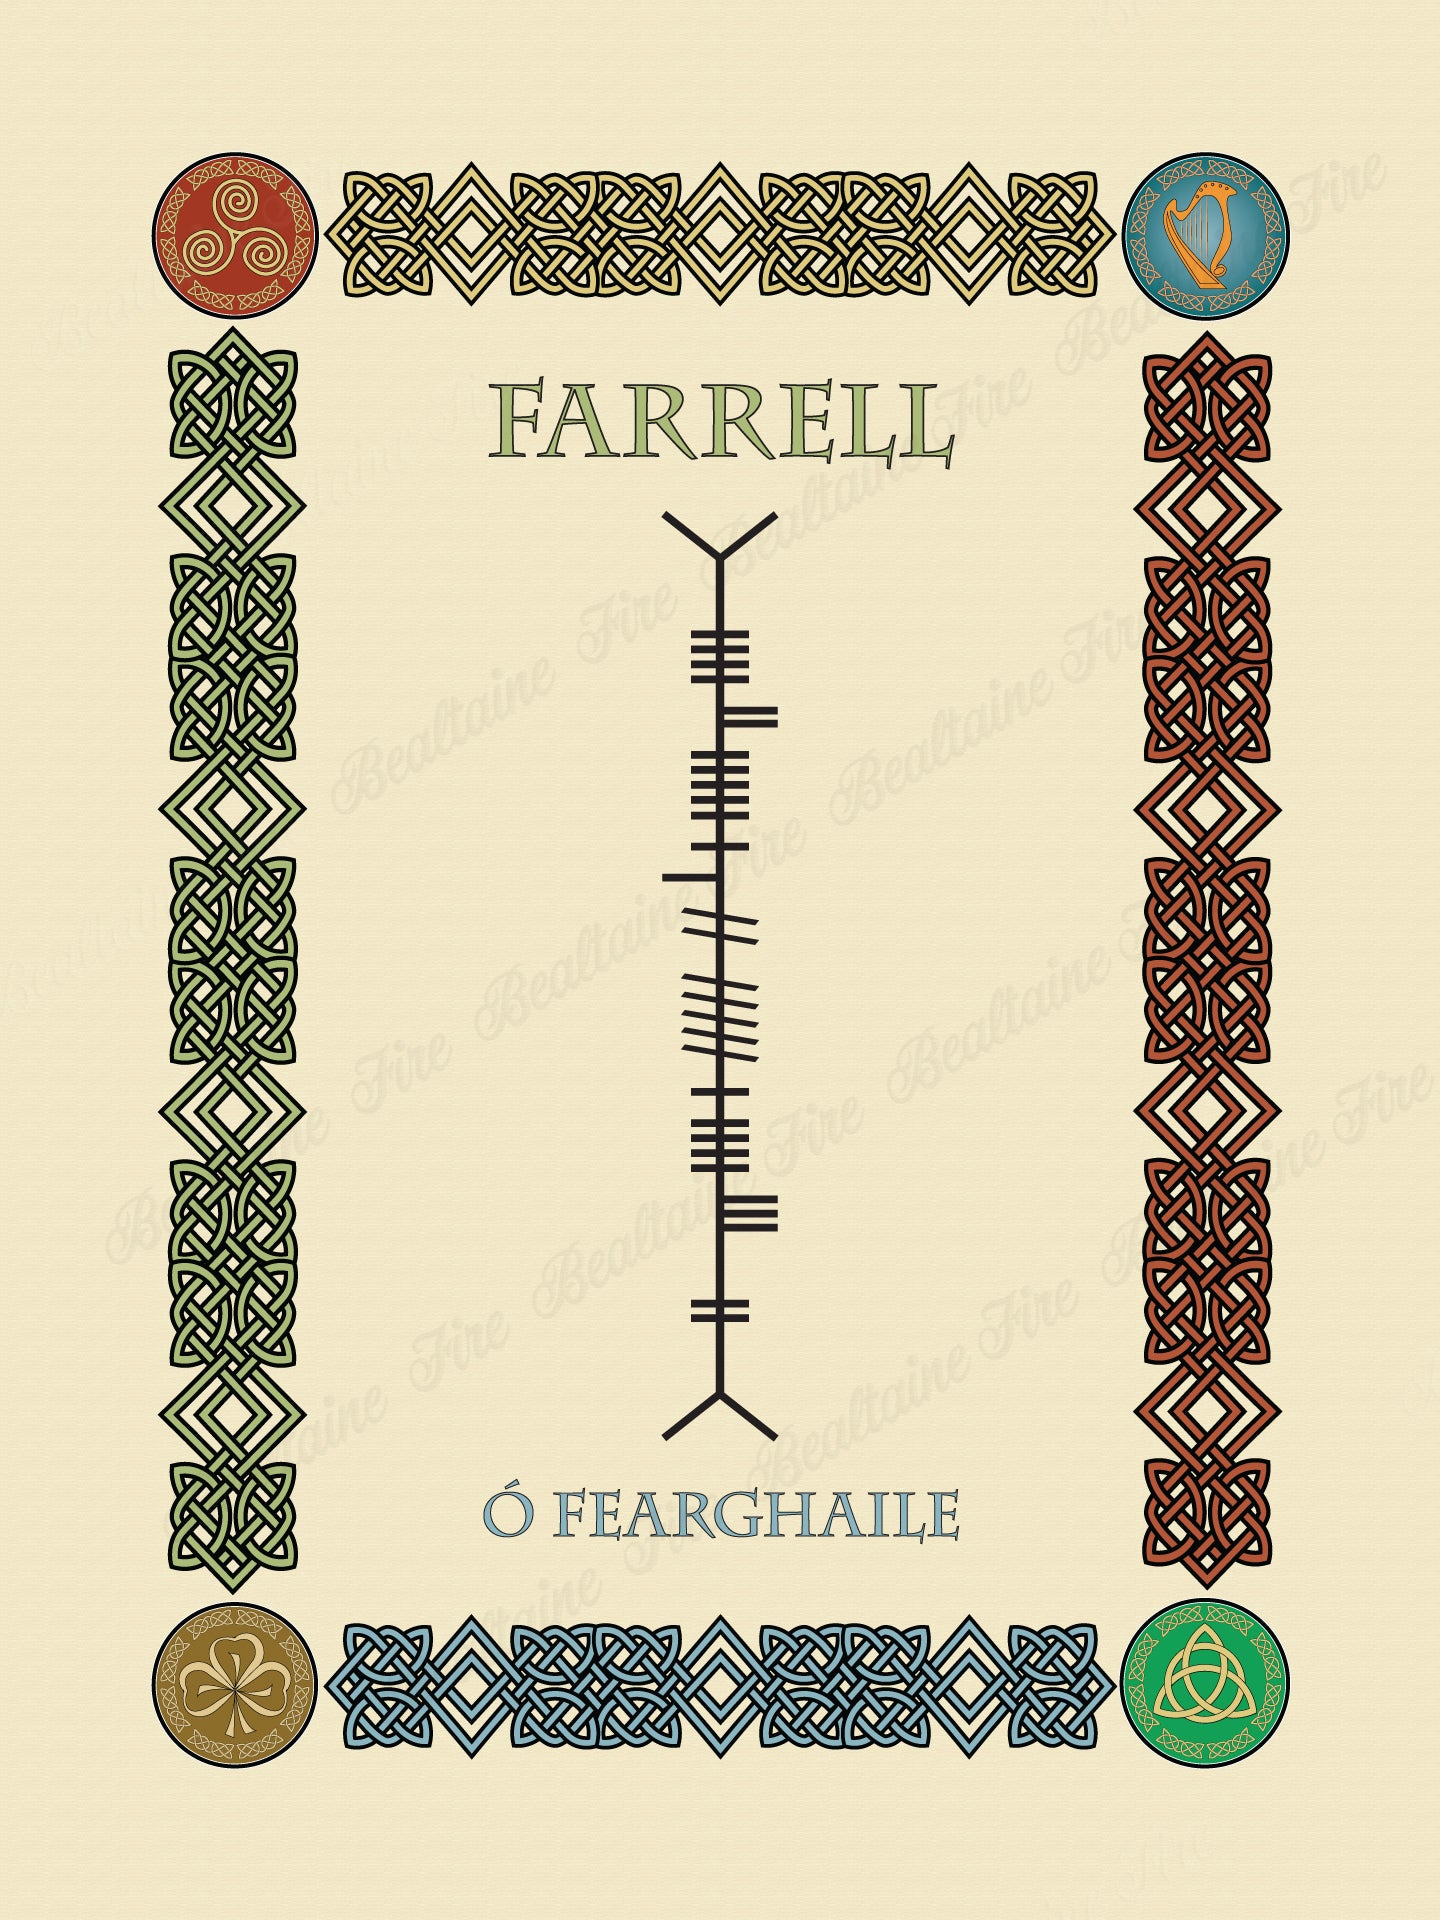 Farrell in Old Irish and Ogham - PDF Download